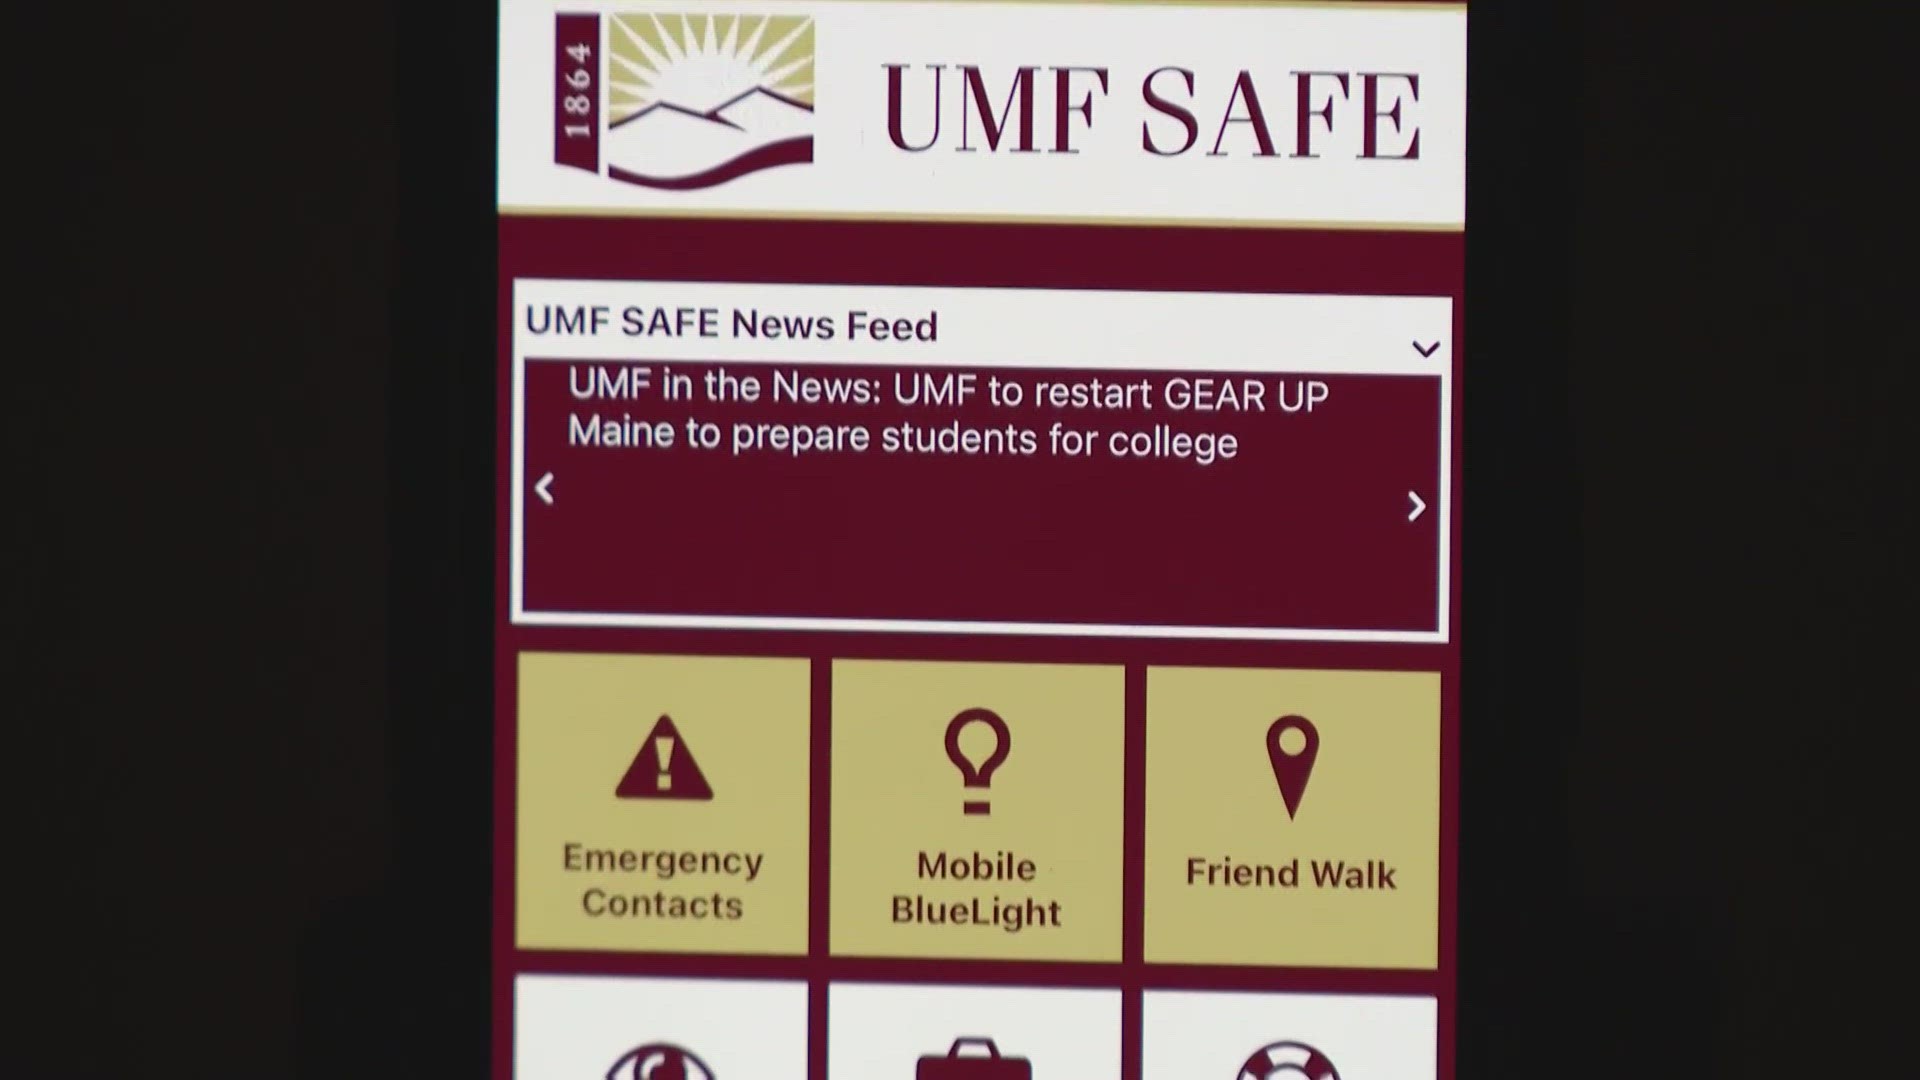 The UMF Safe app puts critical services at students' fingertips.